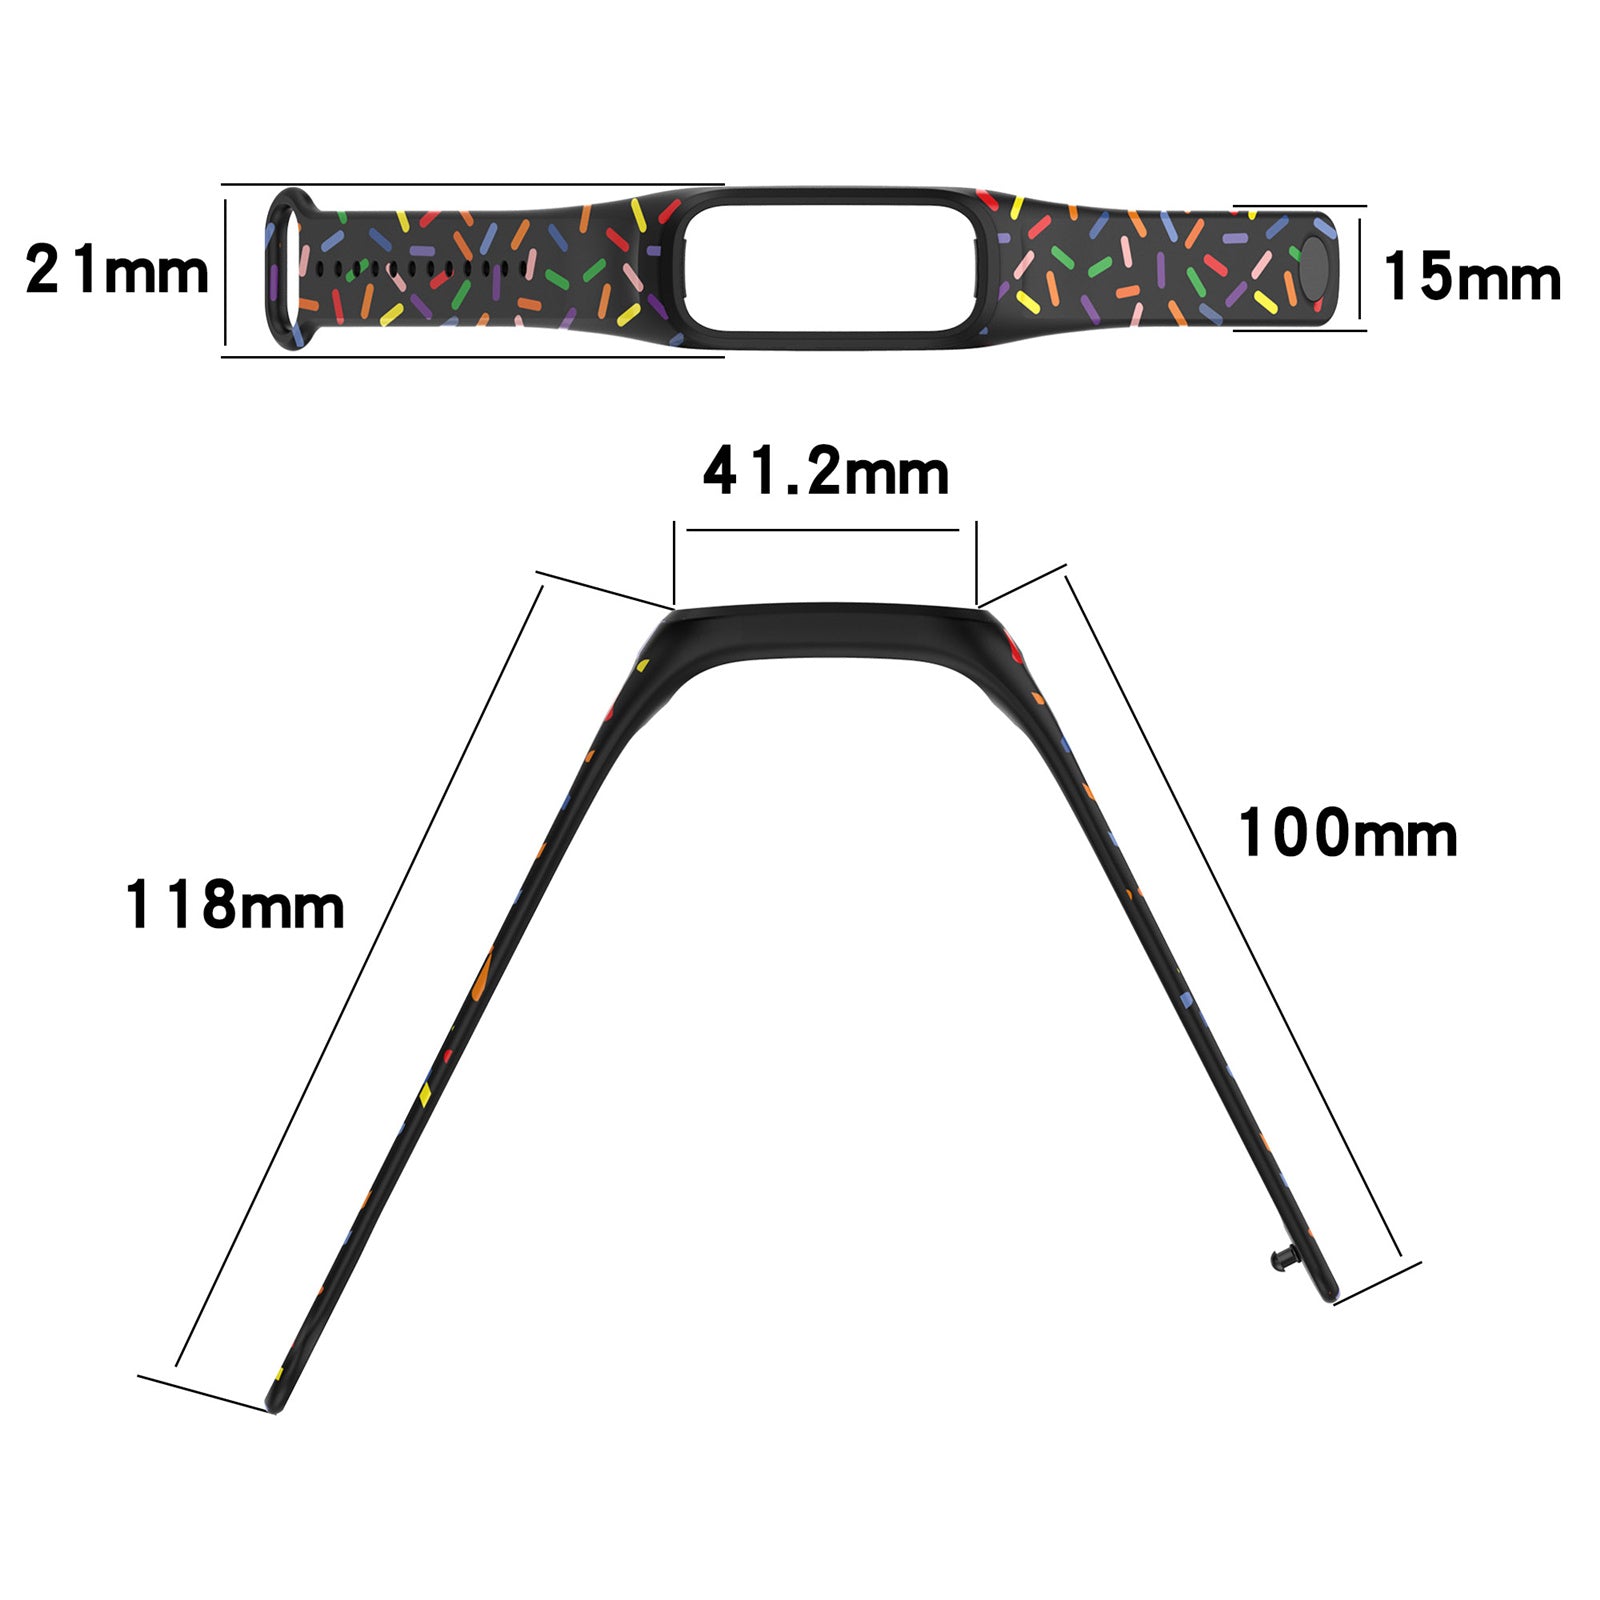 Uniqkart for Oppo Band Integrated Silicone Strap Watch Case Colorful Spotted Wrist Band - Black